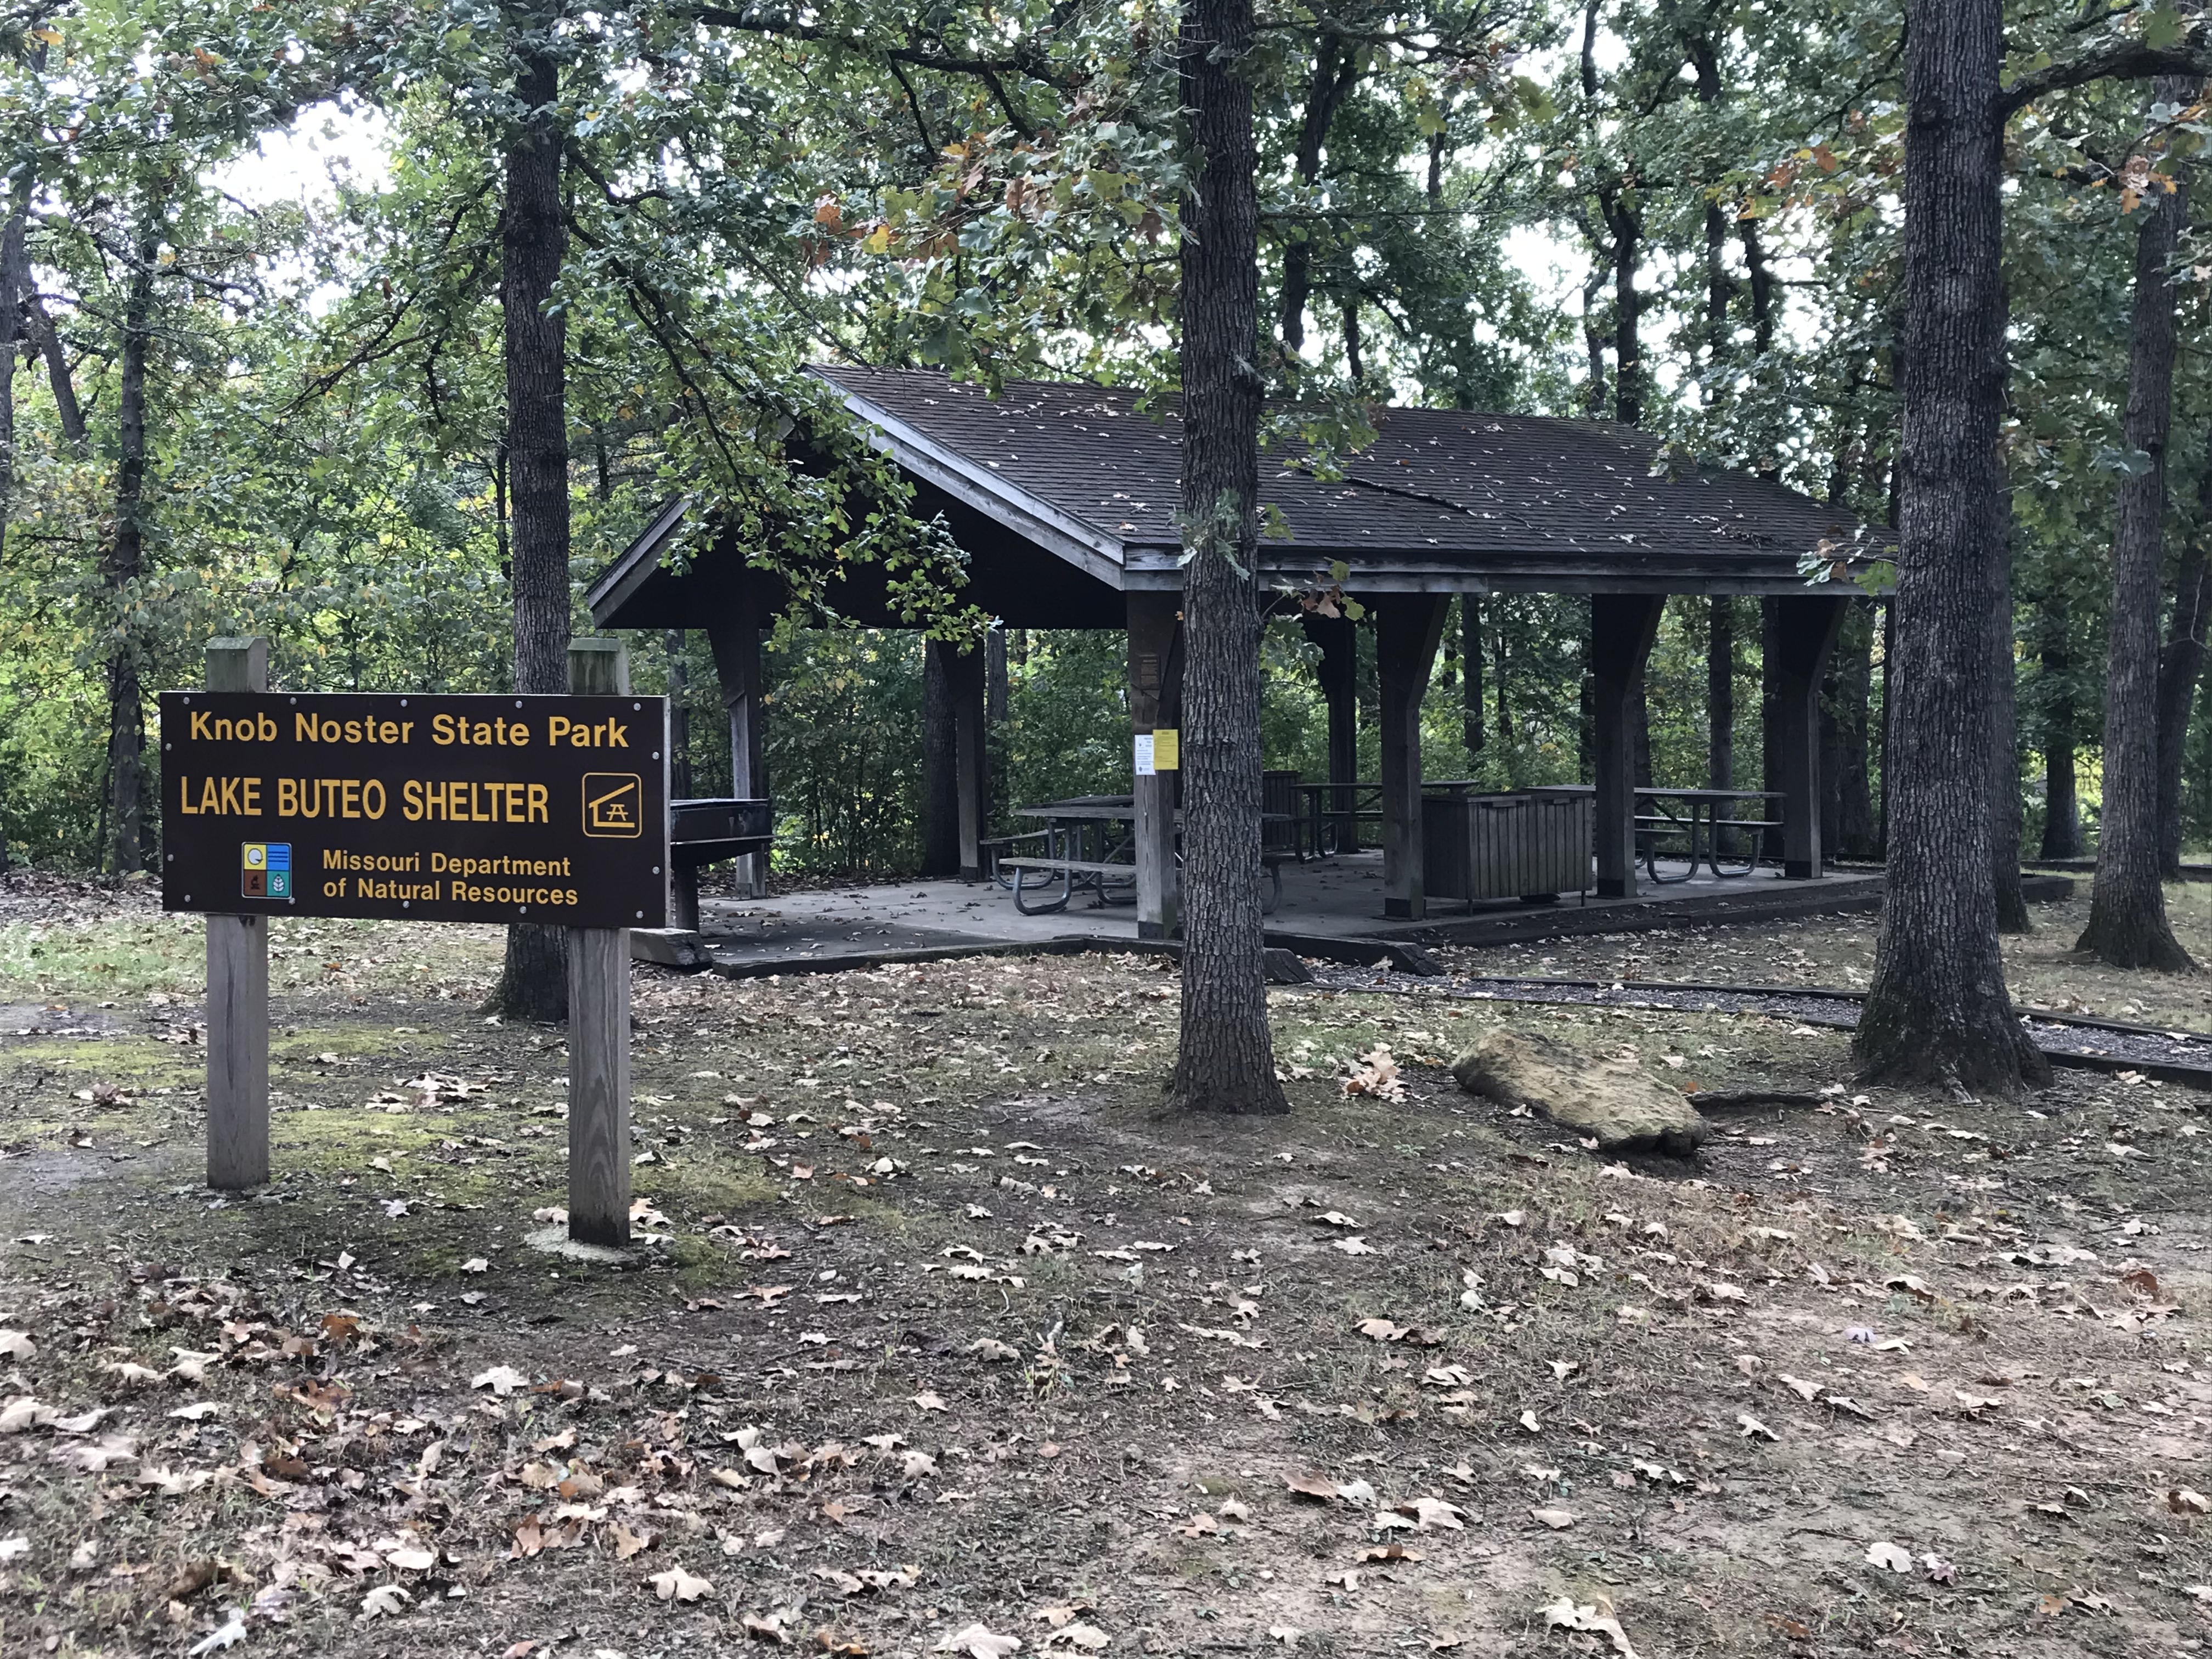 Picnic shelter with Lake Buteo Shelter sign in front